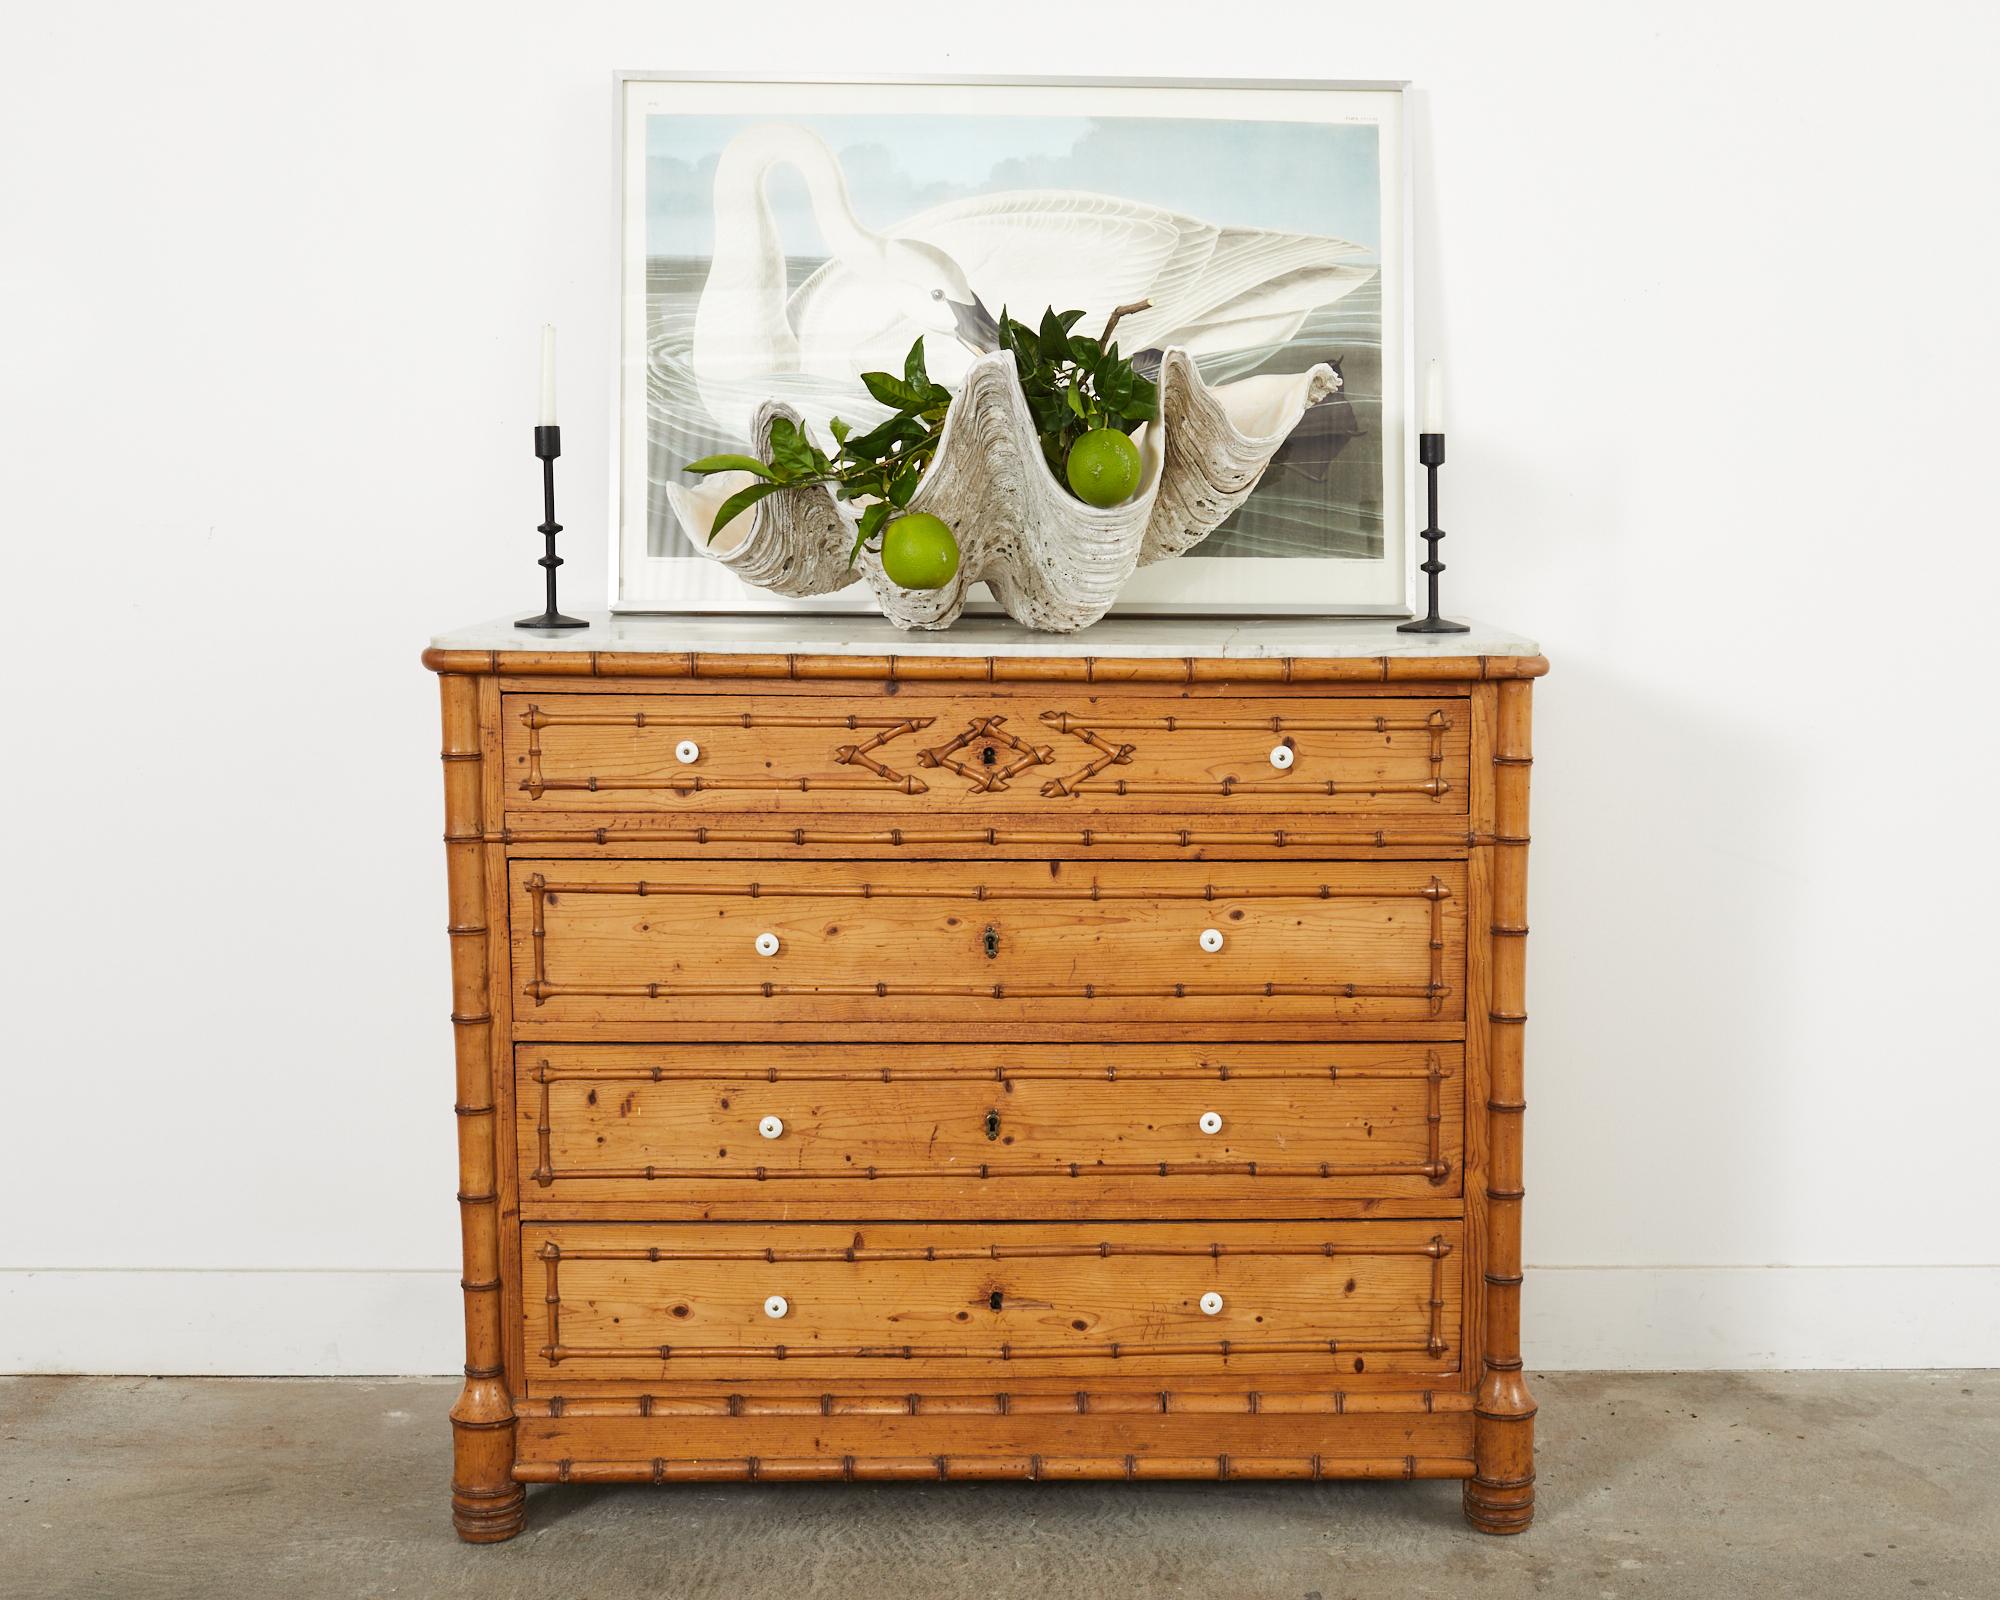 Grand 19th century English Aesthetic movement faux bamboo pine chest featuring a Carrara marble top. The large commode measures 48 inches wide and 40 inches high. The case is fitted with four storage drawers having white porcelain pulls. Beautifully